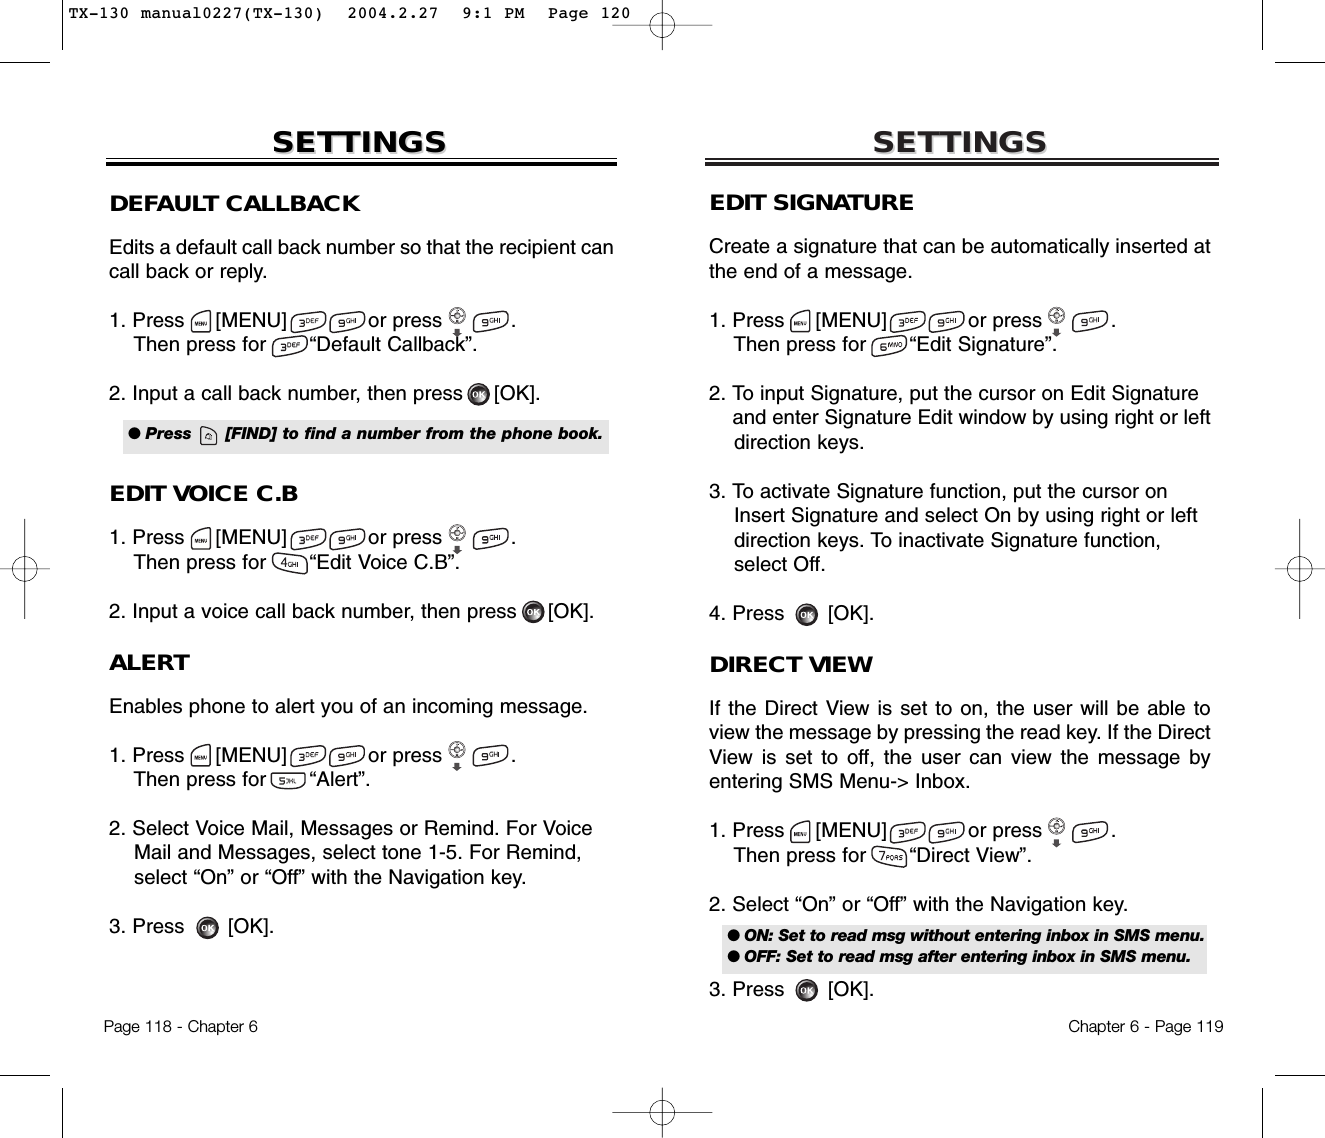 SETTINGSSETTINGSChapter 6 - Page 119Page 118 - Chapter 6SETTINGSSETTINGSDEFAULT CALLBACKEdits a default call back number so that the recipient cancall back or reply.1. Press     [MENU]             or press           .  Then press for       “Default Callback”.2. Input a call back number, then press [OK].EDIT VOICE C.B1. Press     [MENU]             or press           .  Then press for       “Edit Voice C.B”.2. Input a voice call back number, then press [OK].ALERTEnables phone to alert you of an incoming message.1. Press     [MENU]             or press           .  Then press for       “Alert”.2. Select Voice Mail, Messages or Remind. For Voice Mail and Messages, select tone 1-5. For Remind, select “On” or “Off” with the Navigation key.3. Press       [OK].● Press      [FIND] to find a number from the phone book.EDIT SIGNATURECreate a signature that can be automatically inserted atthe end of a message.1. Press     [MENU]             or press           .  Then press for       “Edit Signature”.2. To input Signature, put the cursor on Edit Signature and enter Signature Edit window by using right or left direction keys.3. To activate Signature function, put the cursor on Insert Signature and select On by using right or left direction keys. To inactivate Signature function, select Off.4. Press       [OK].DIRECT VIEWIf the Direct View is set to on, the user will be able toview the message by pressing the read key. If the DirectView is set to off, the user can view the message byentering SMS Menu-&gt; Inbox.1. Press     [MENU]             or press           .  Then press for       “Direct View”.2. Select “On” or “Off” with the Navigation key.3. Press       [OK].● ON: Set to read msg without entering inbox in SMS menu.● OFF: Set to read msg after entering inbox in SMS menu.TX-130 manual0227(TX-130)  2004.2.27  9:1 PM  Page 120